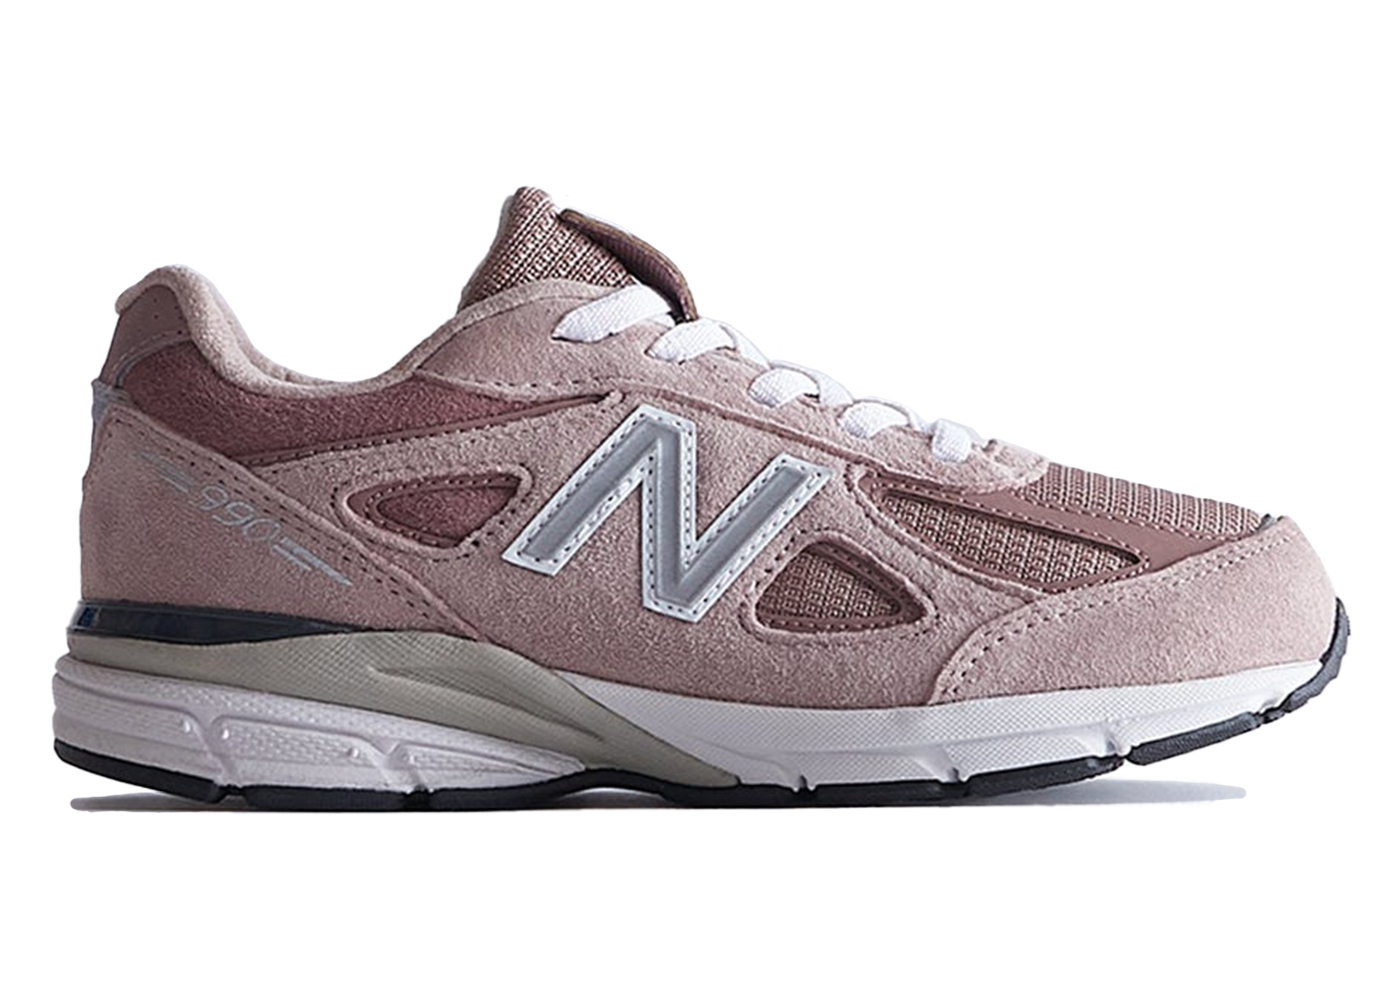 Buy New Balance 990v4 Shoes & New Sneakers - StockX